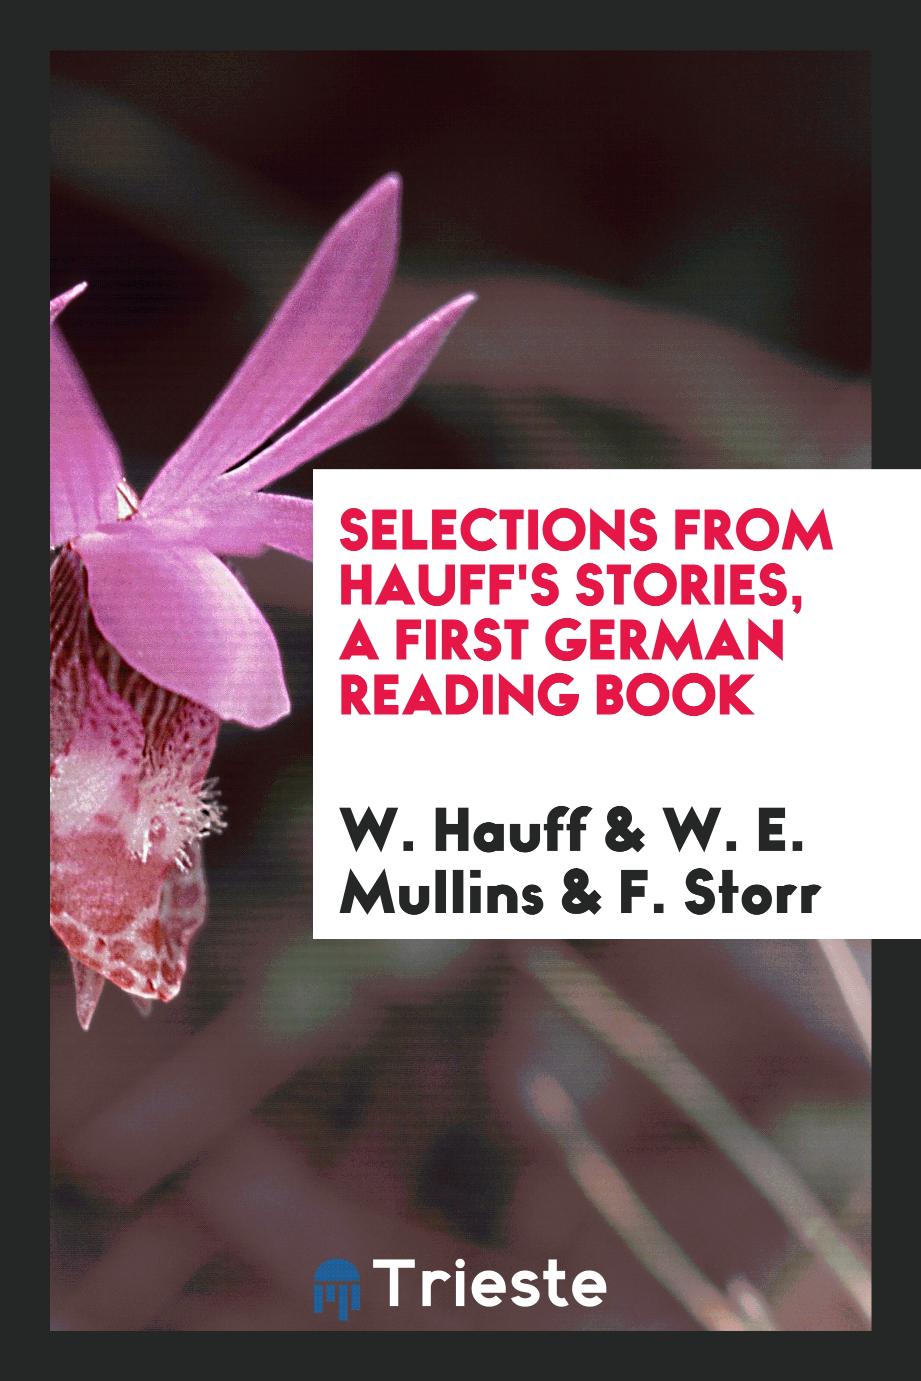 Selections from Hauff's Stories, a First German Reading Book